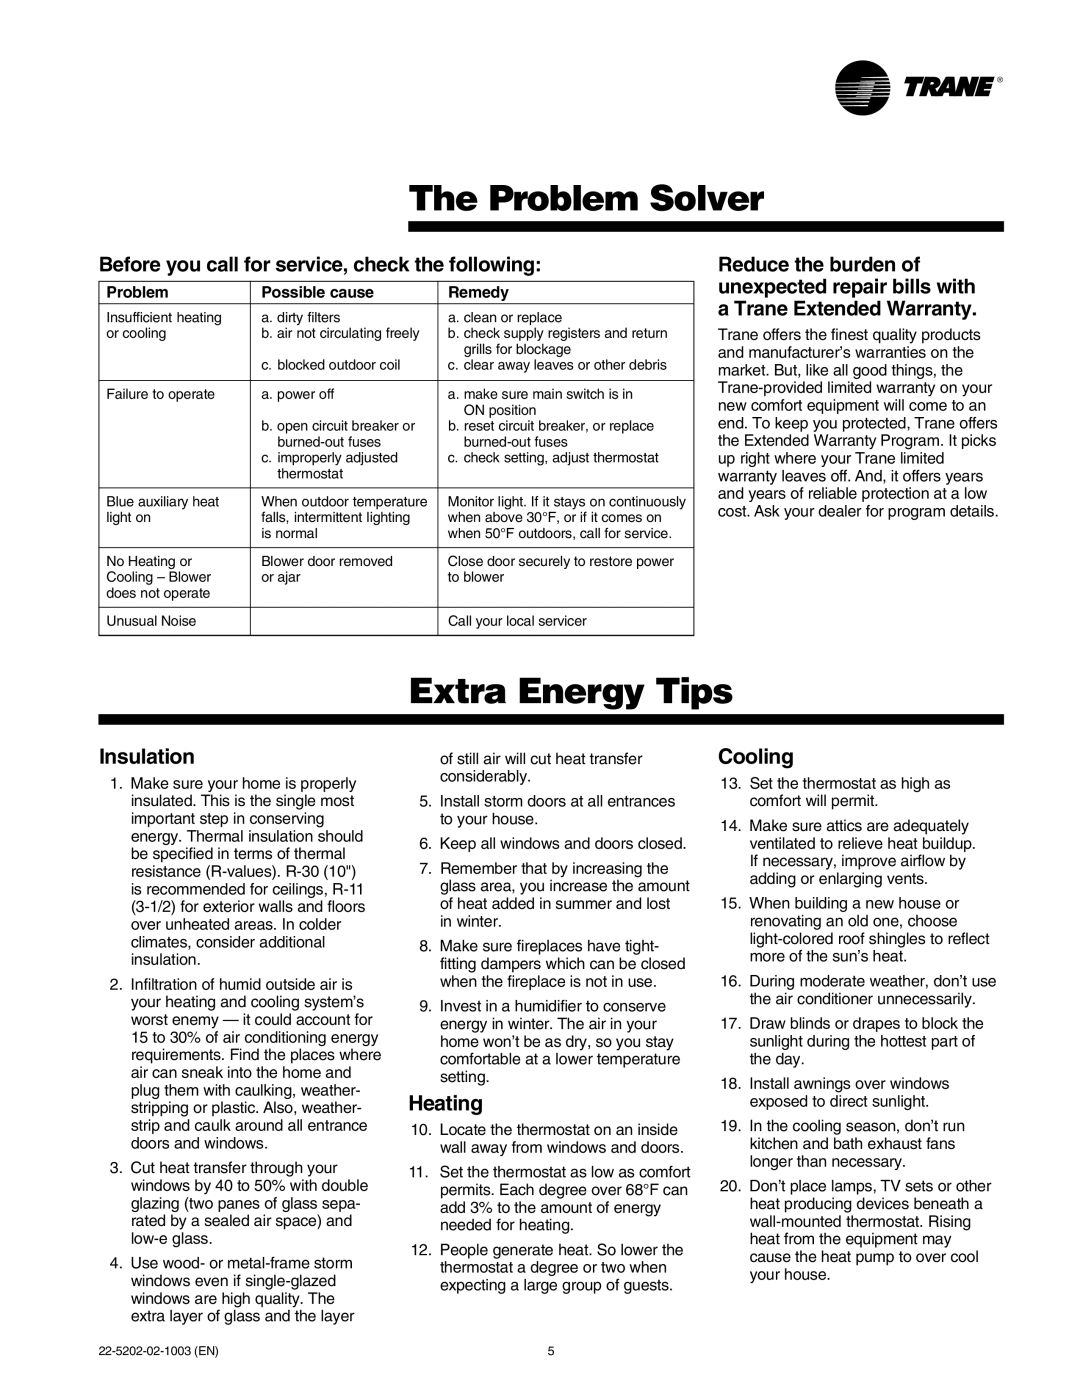 Trane 2TWB0-UM-2 manual The Problem Solver, Extra Energy Tips, Insulation, Heating, Cooling, Possible cause, Remedy 